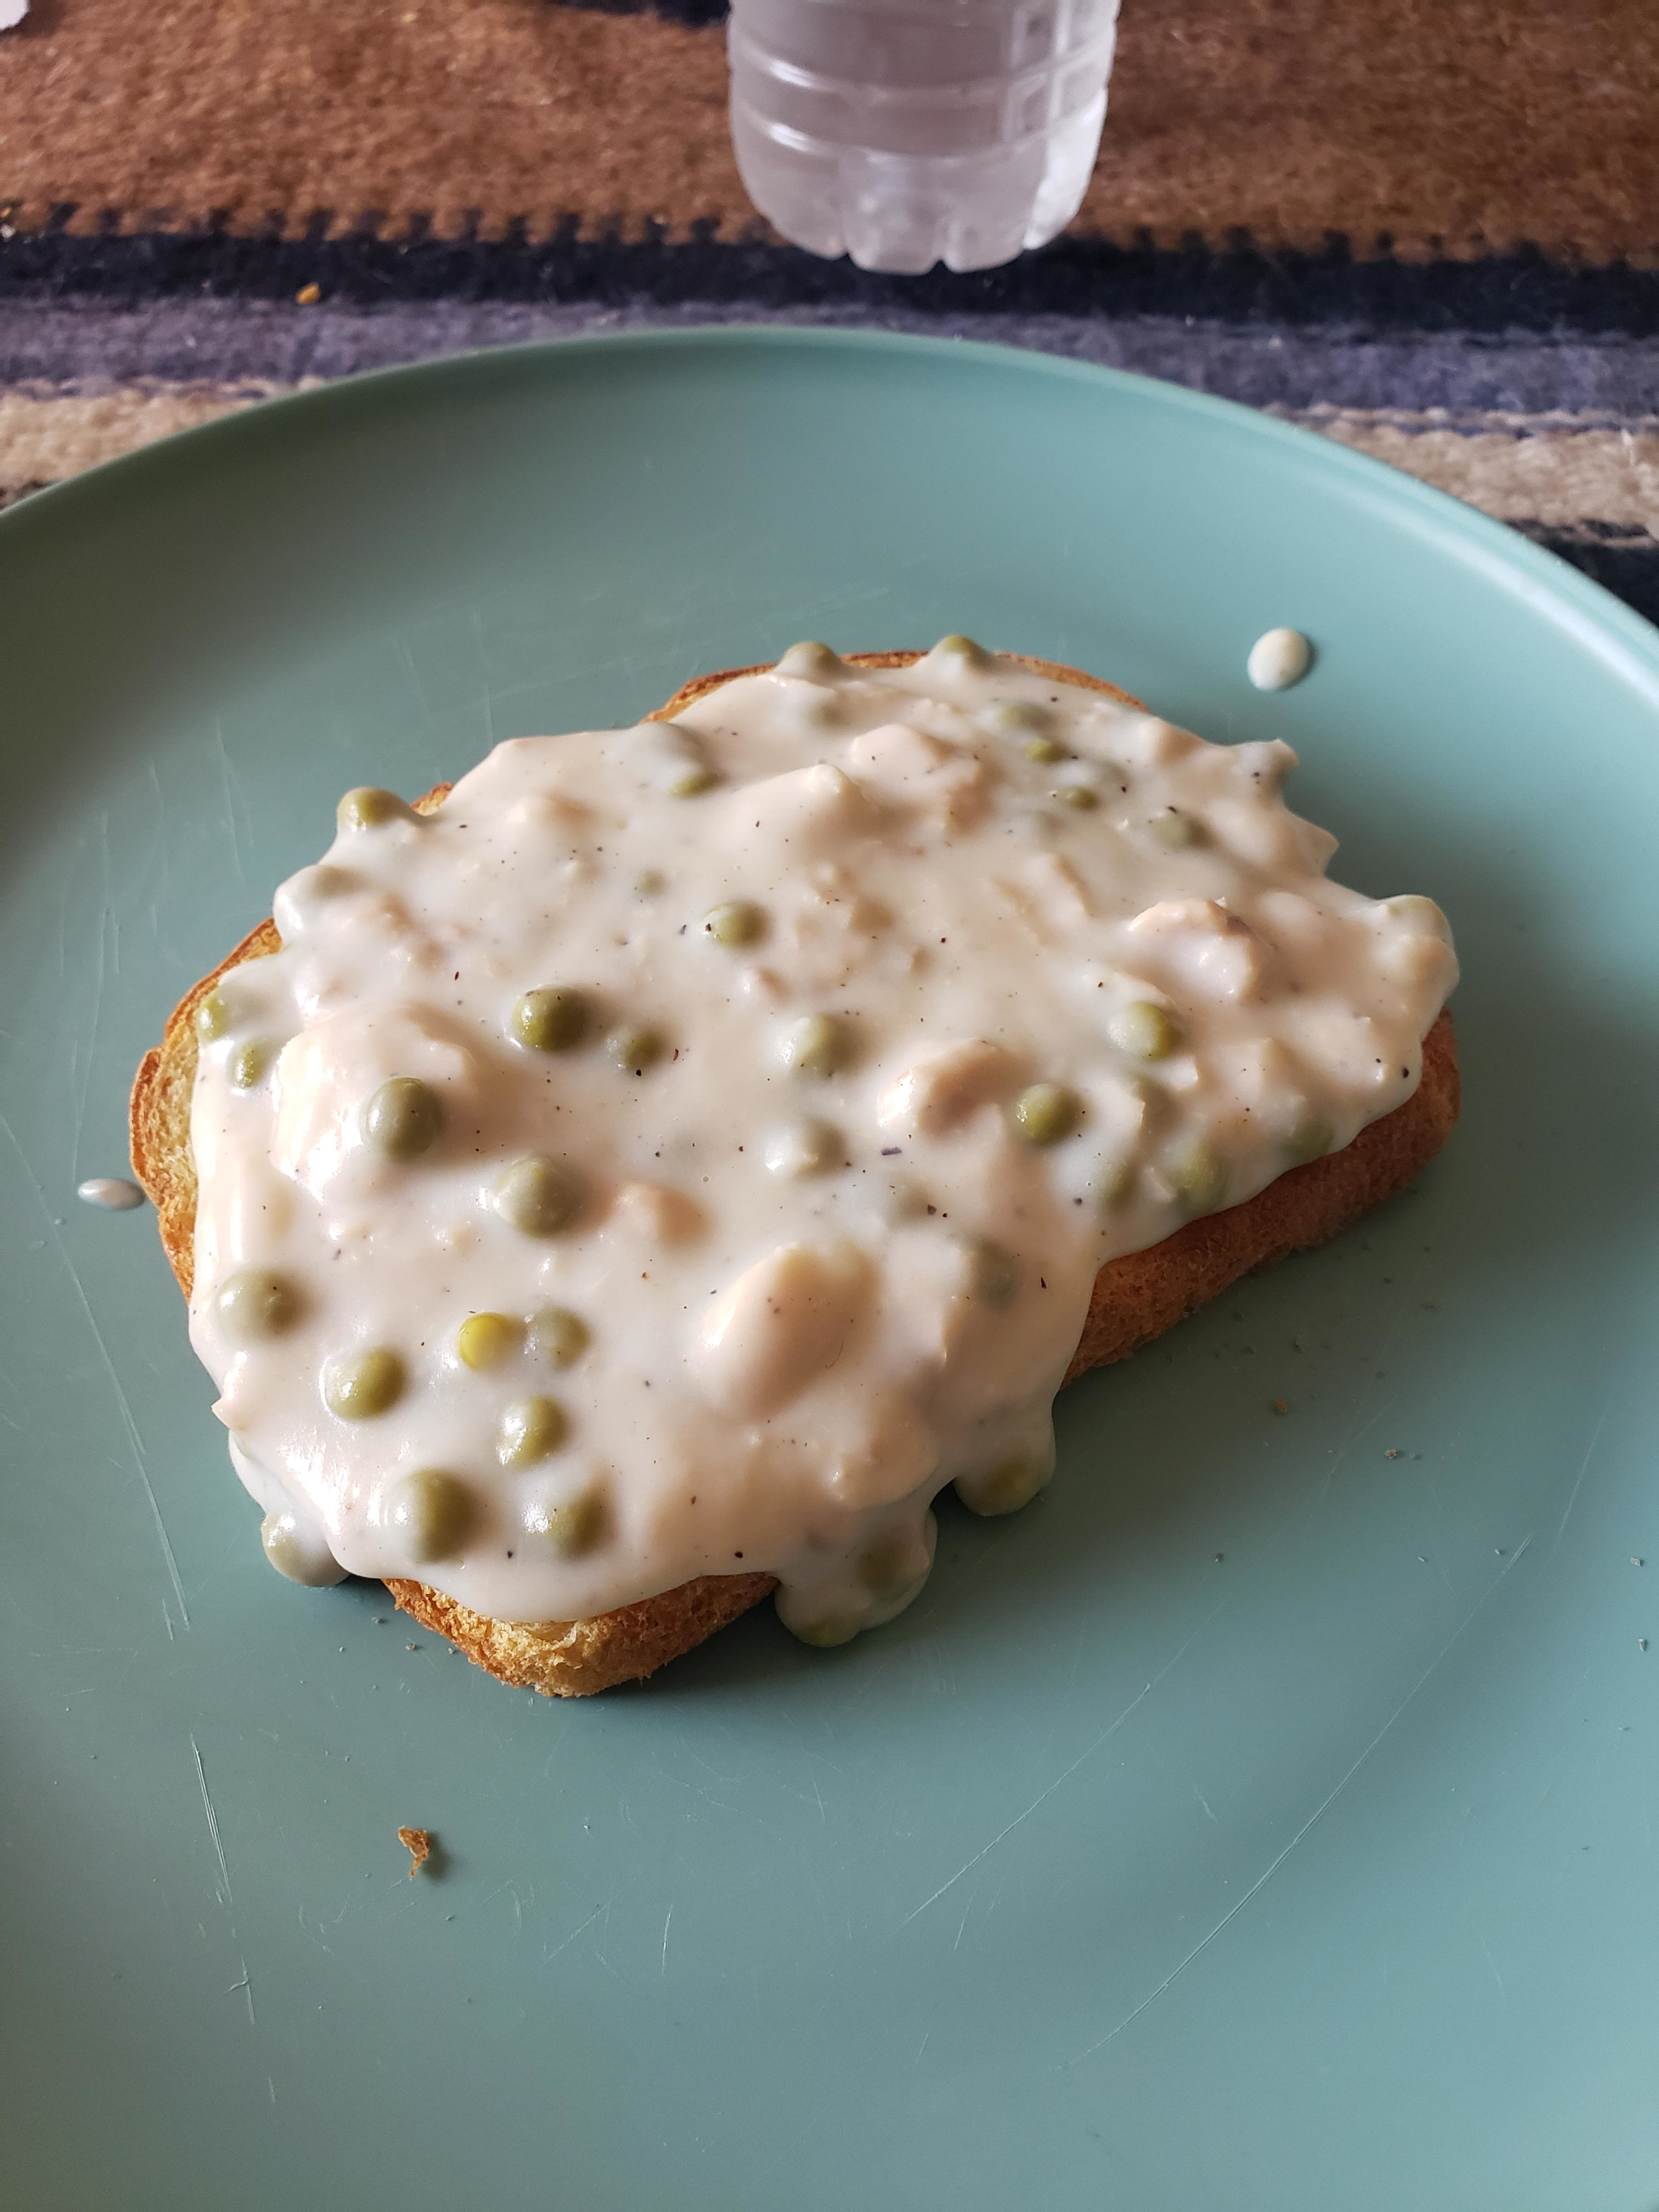 A piece of toast with creamed peas and tuna on a green plate